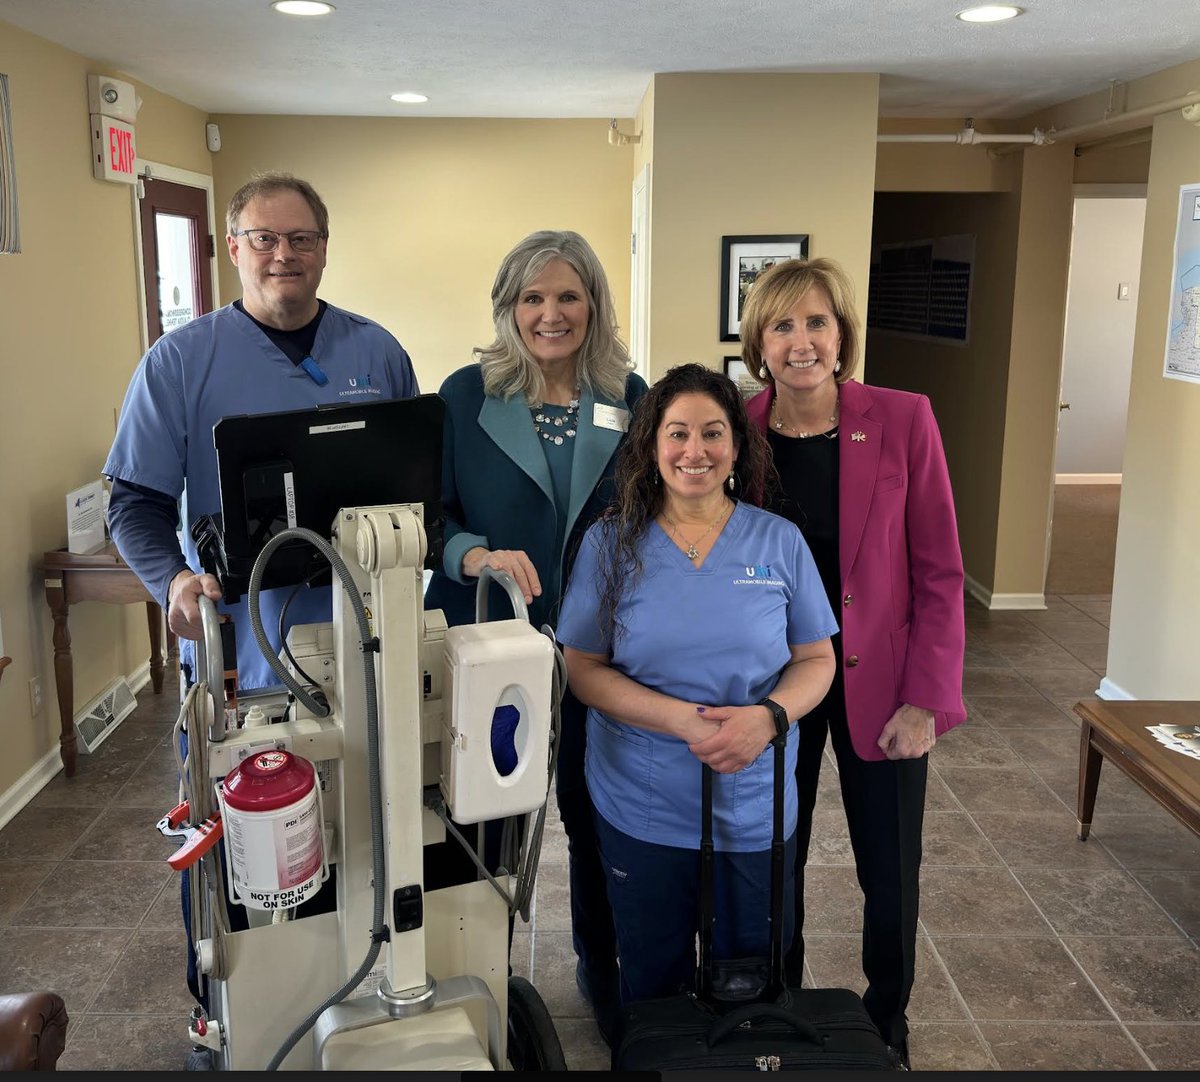 Thank you to Lois Irwin from UltraMobile Imaging for demonstrating the impressive capabilities of their ultrasound machine in our Victor Office. 

Founded in 1993, UltraMobile Imaging continues to be a leader in mobile diagnostic imaging in our community and the country!